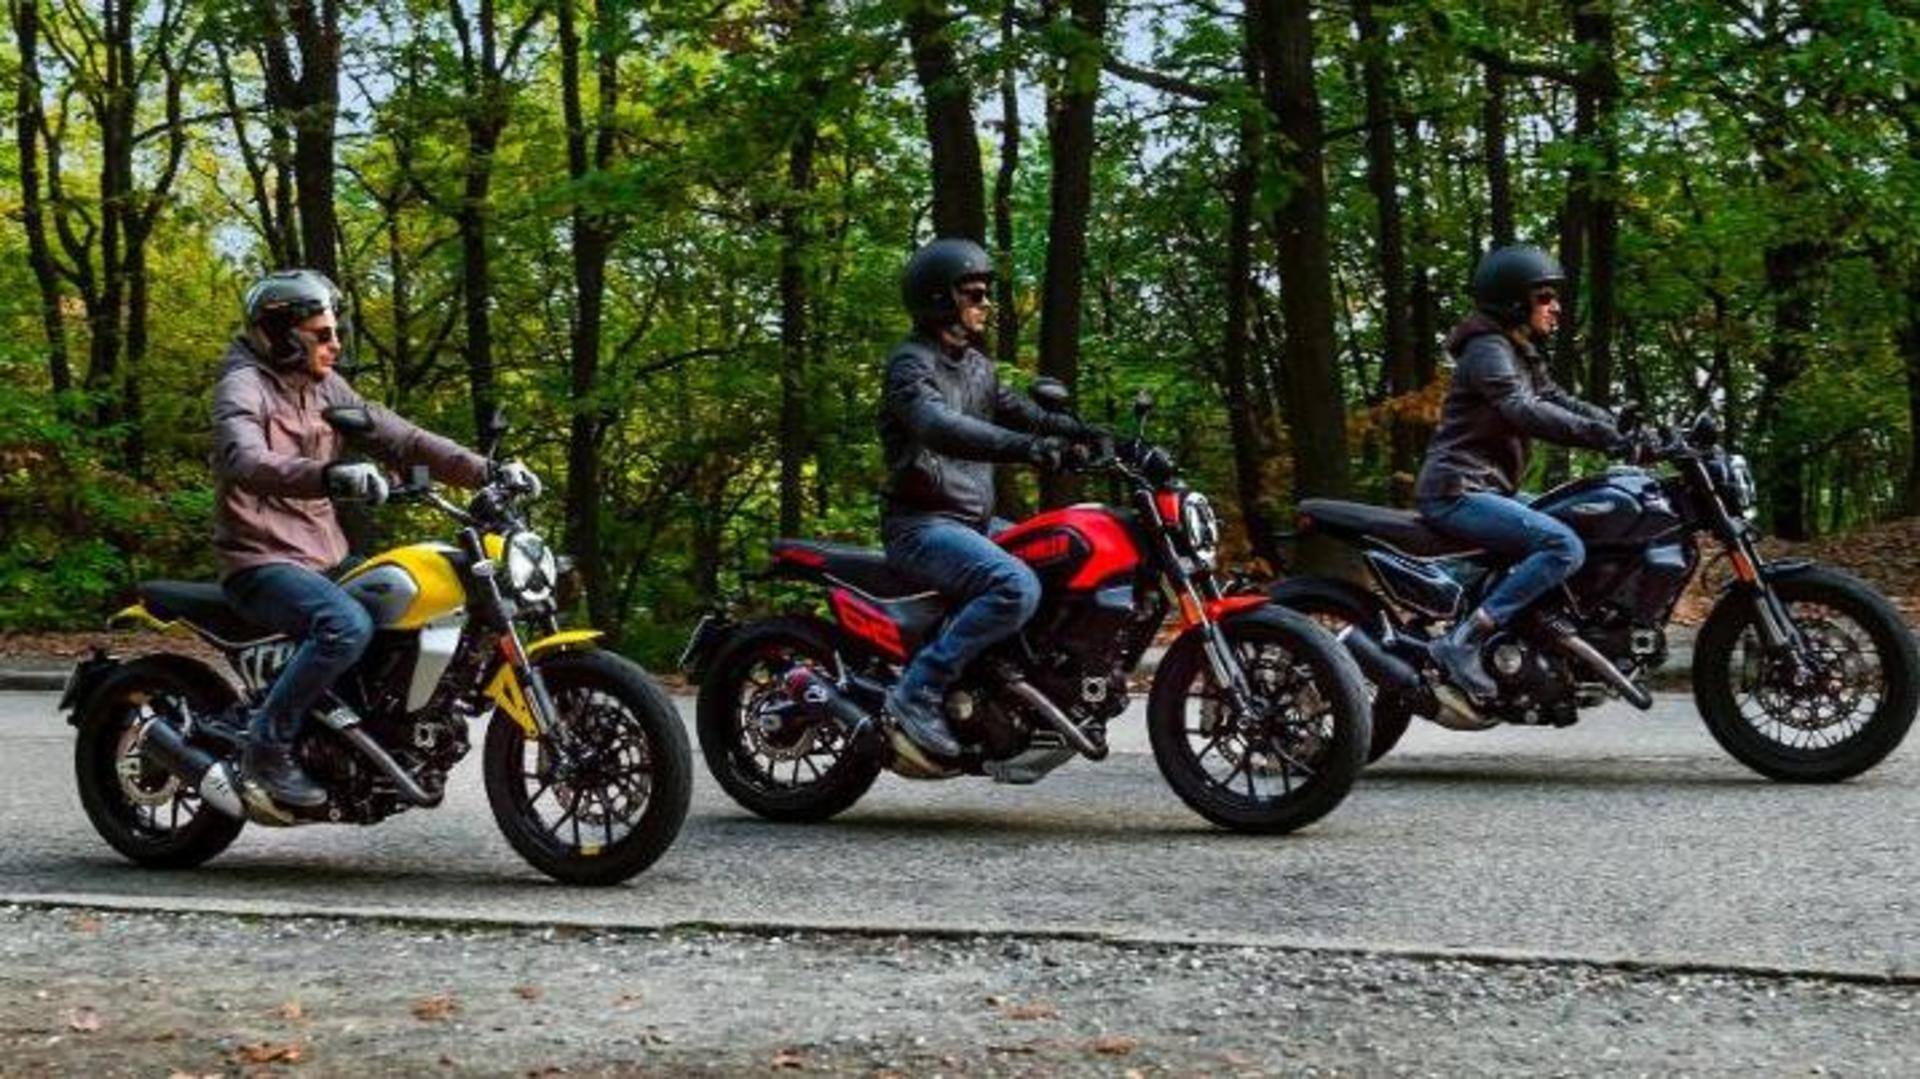 2023 Ducati Scrambler arrives with better looks and more features